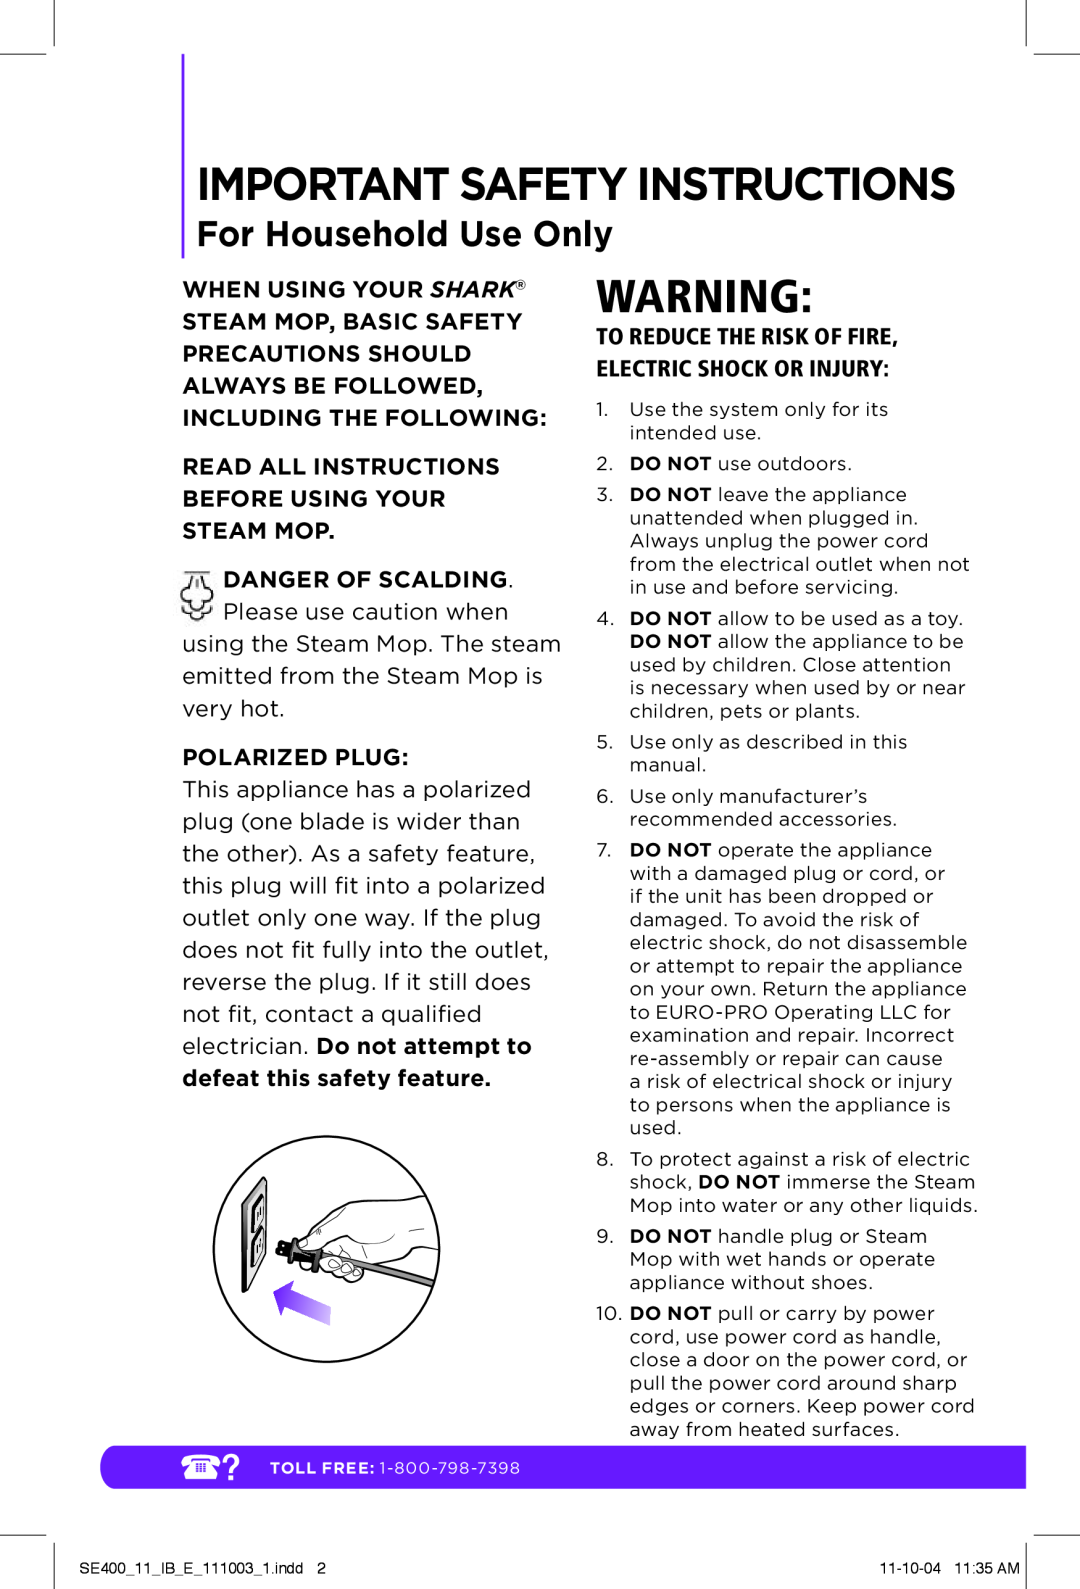 Shark SE400 manual Important Safety Instructions, Read All Instructions Before Using Your Steam Mop, Polarized Plug 